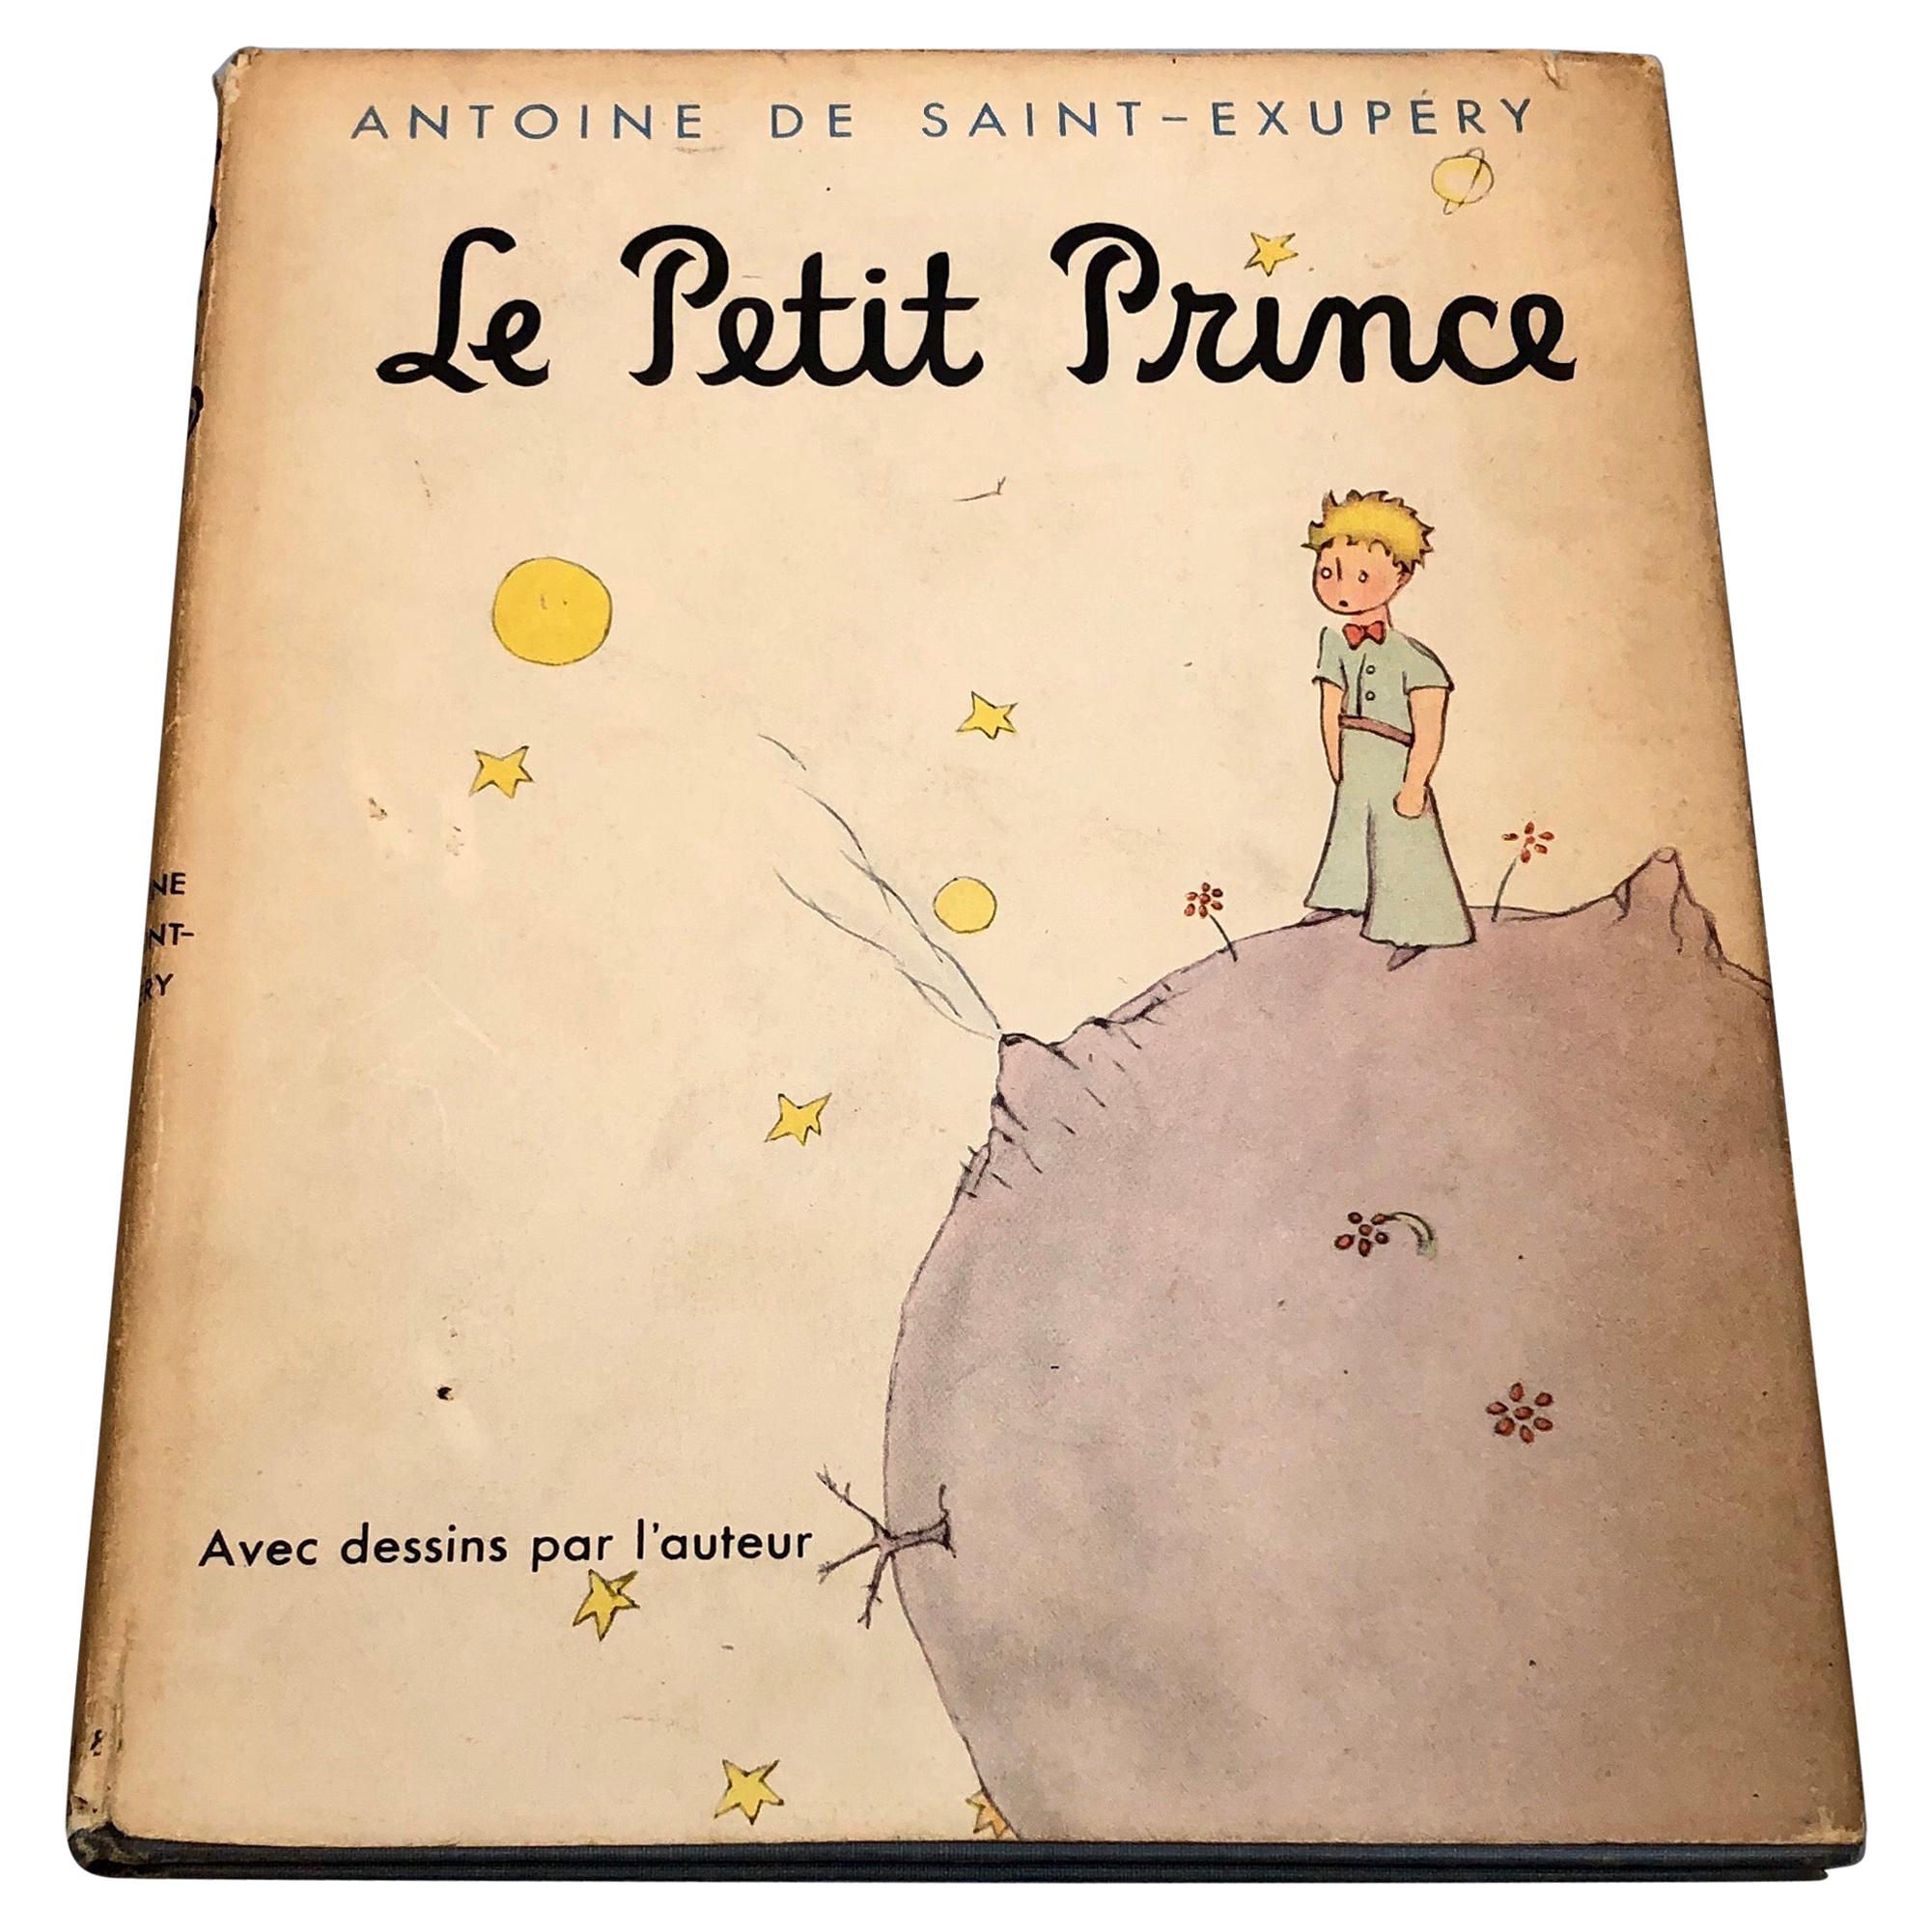 1943 Le Petit Prince Little Prince Hardcover Book French Edition Saint-Exupery For Sale